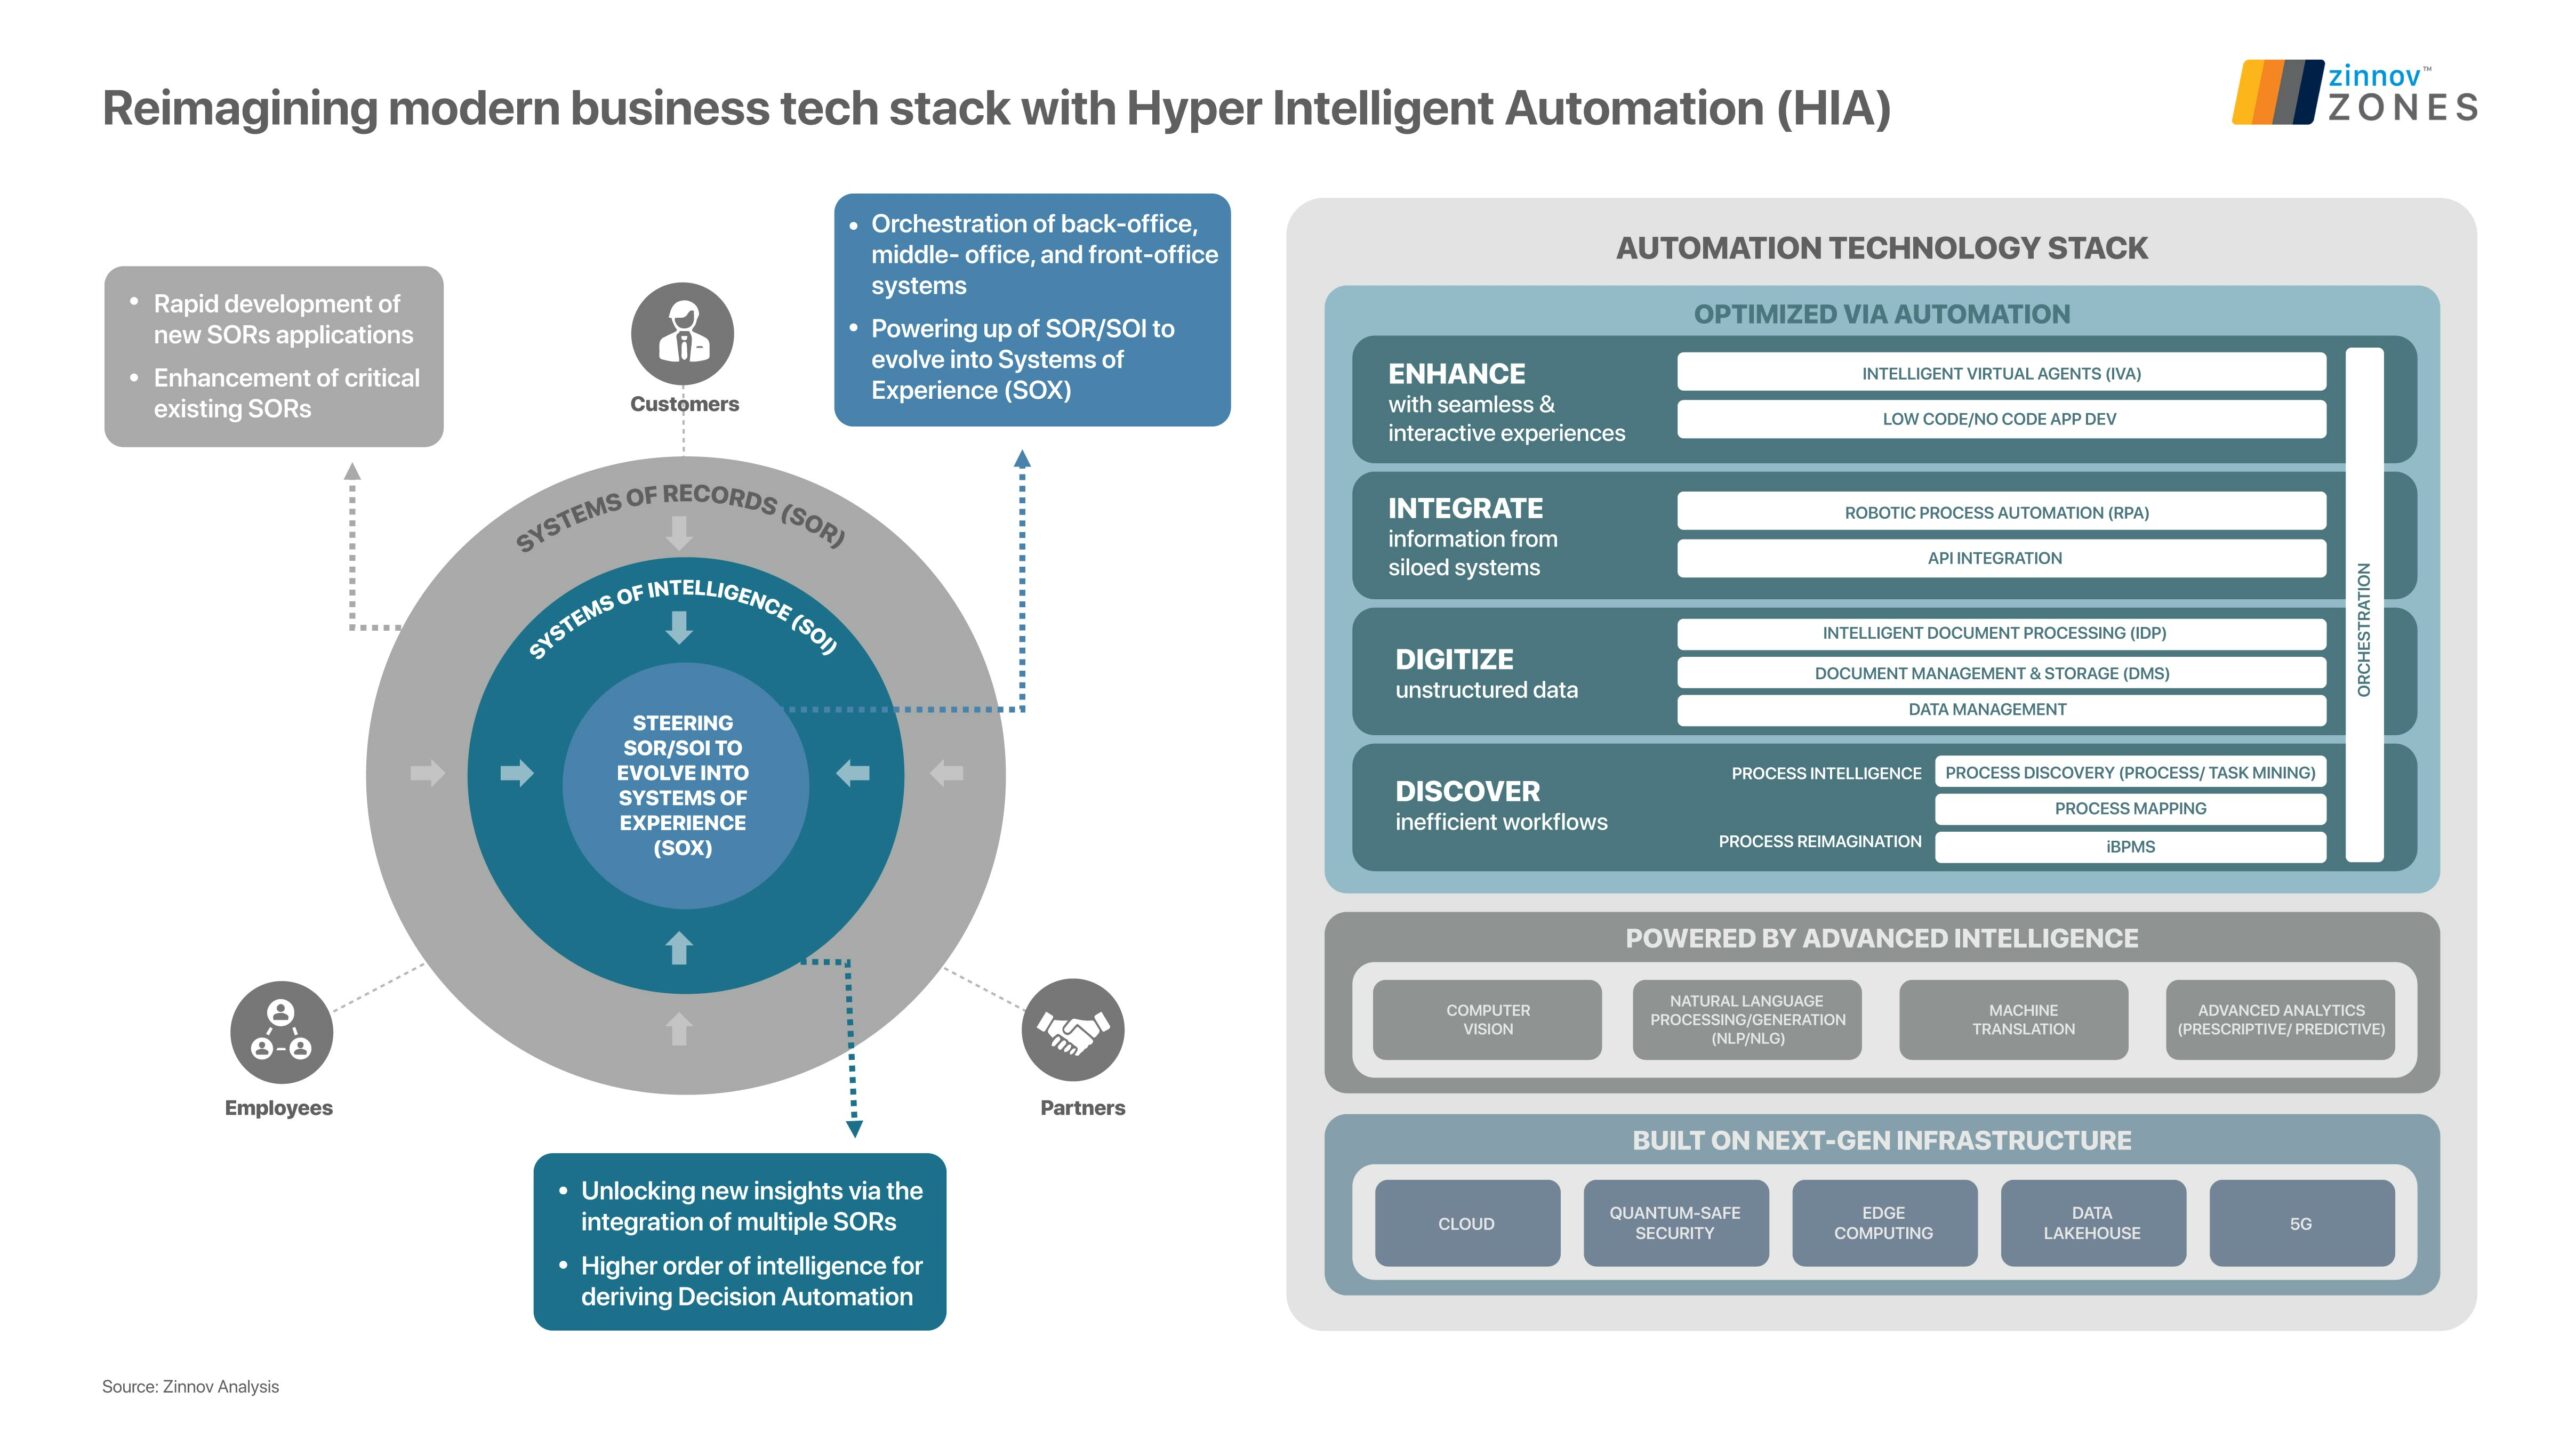 Modern business tech stack with Hyper Intelligent Automation